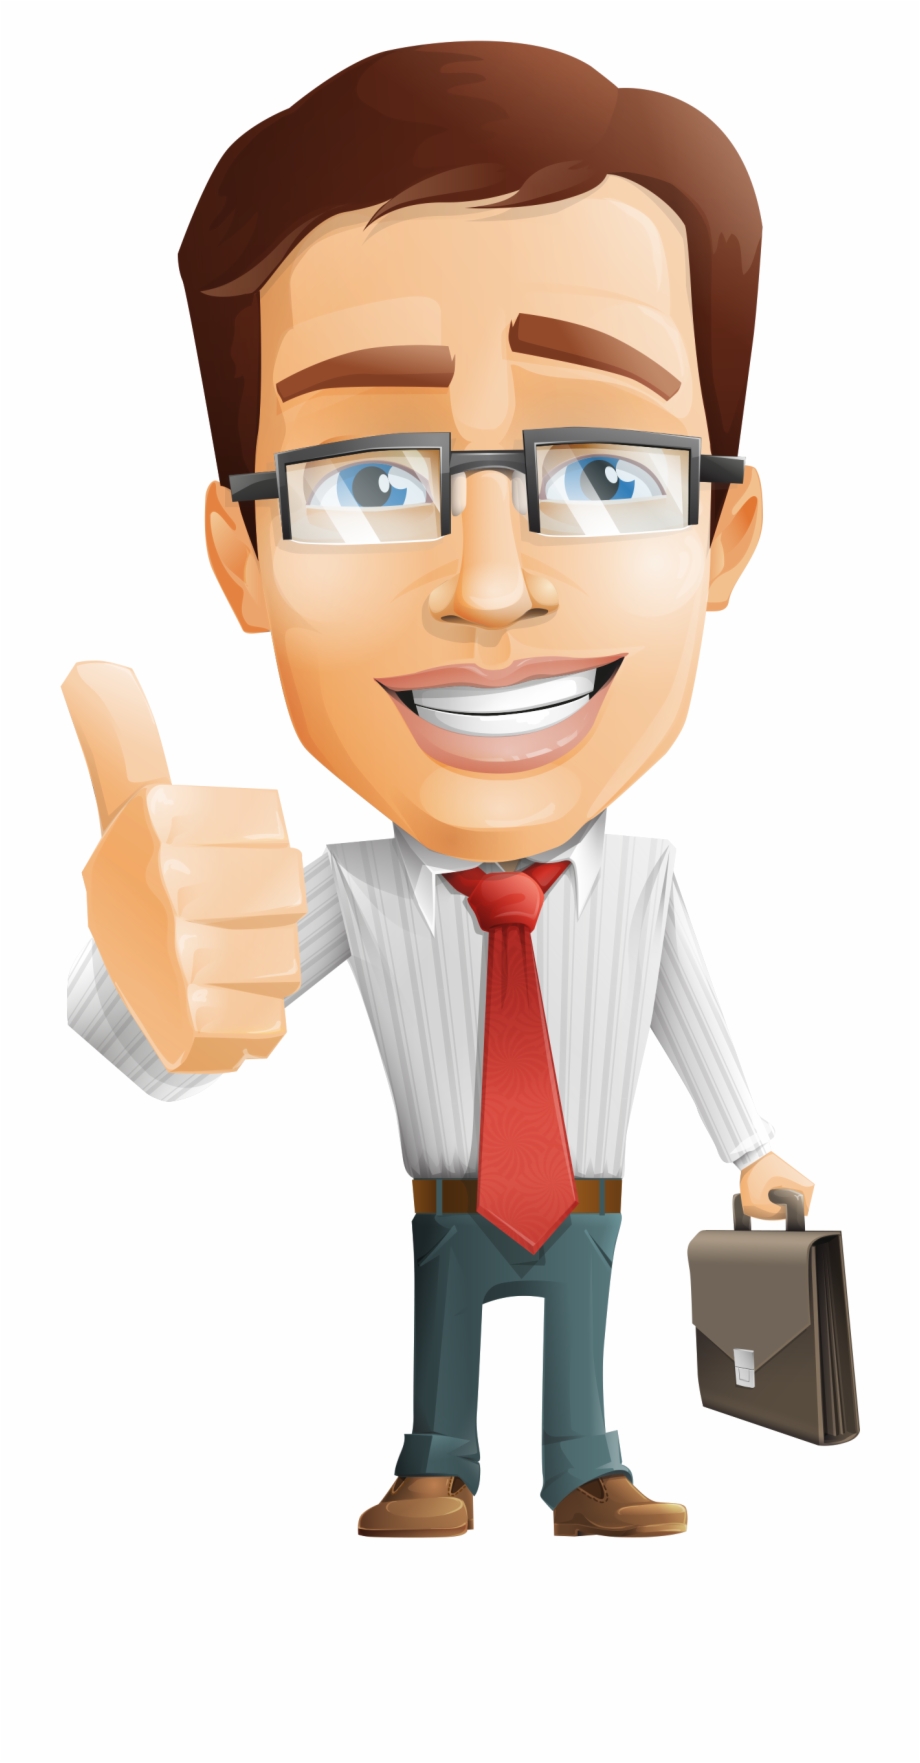 Image Free Stock Businessman Character Http Www Dailystockphoto